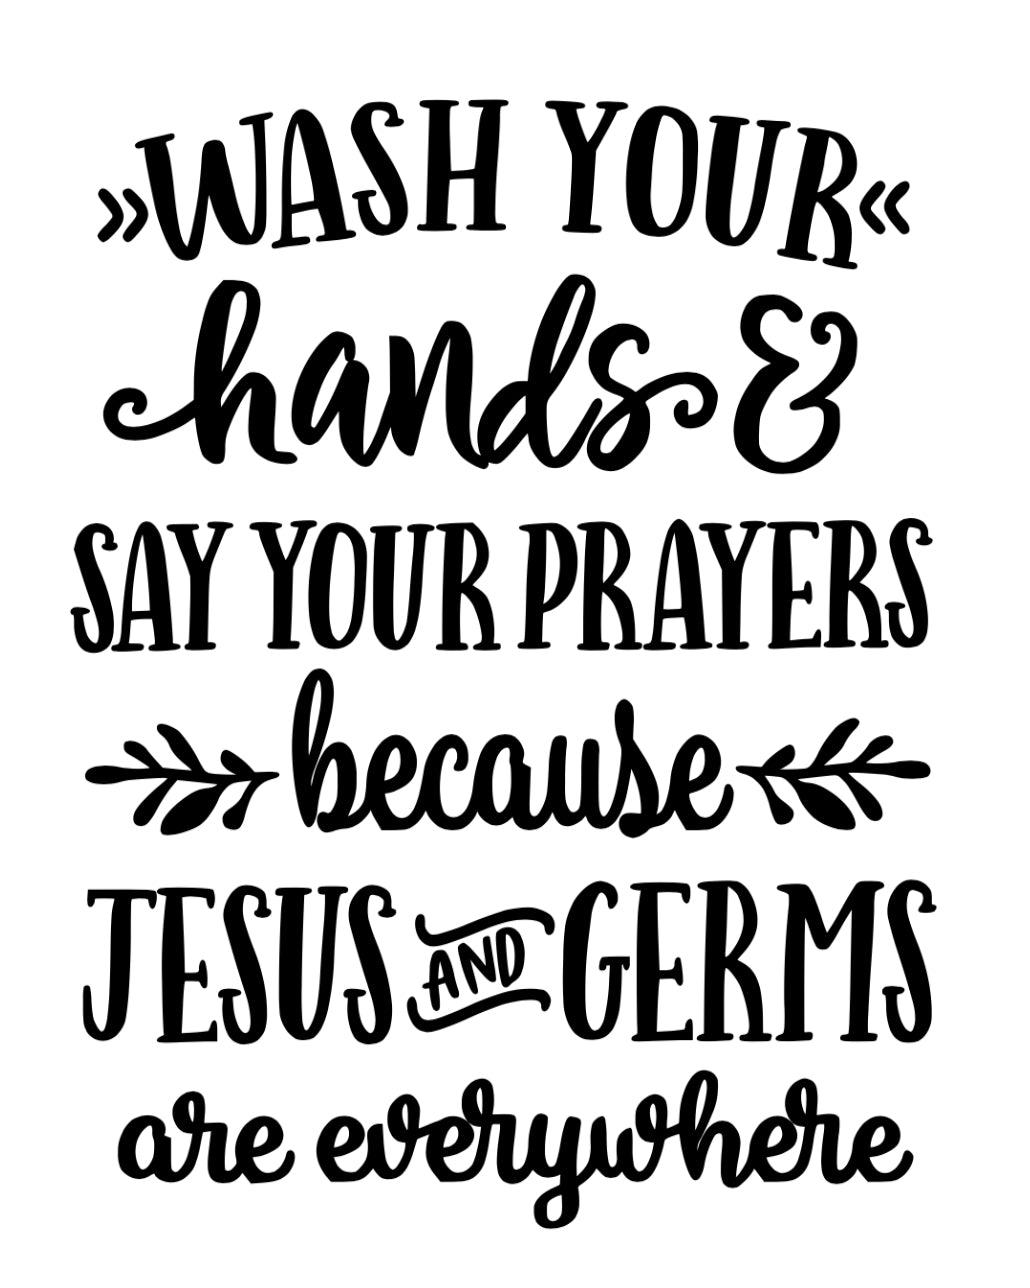 Wash your hands and say your prayers